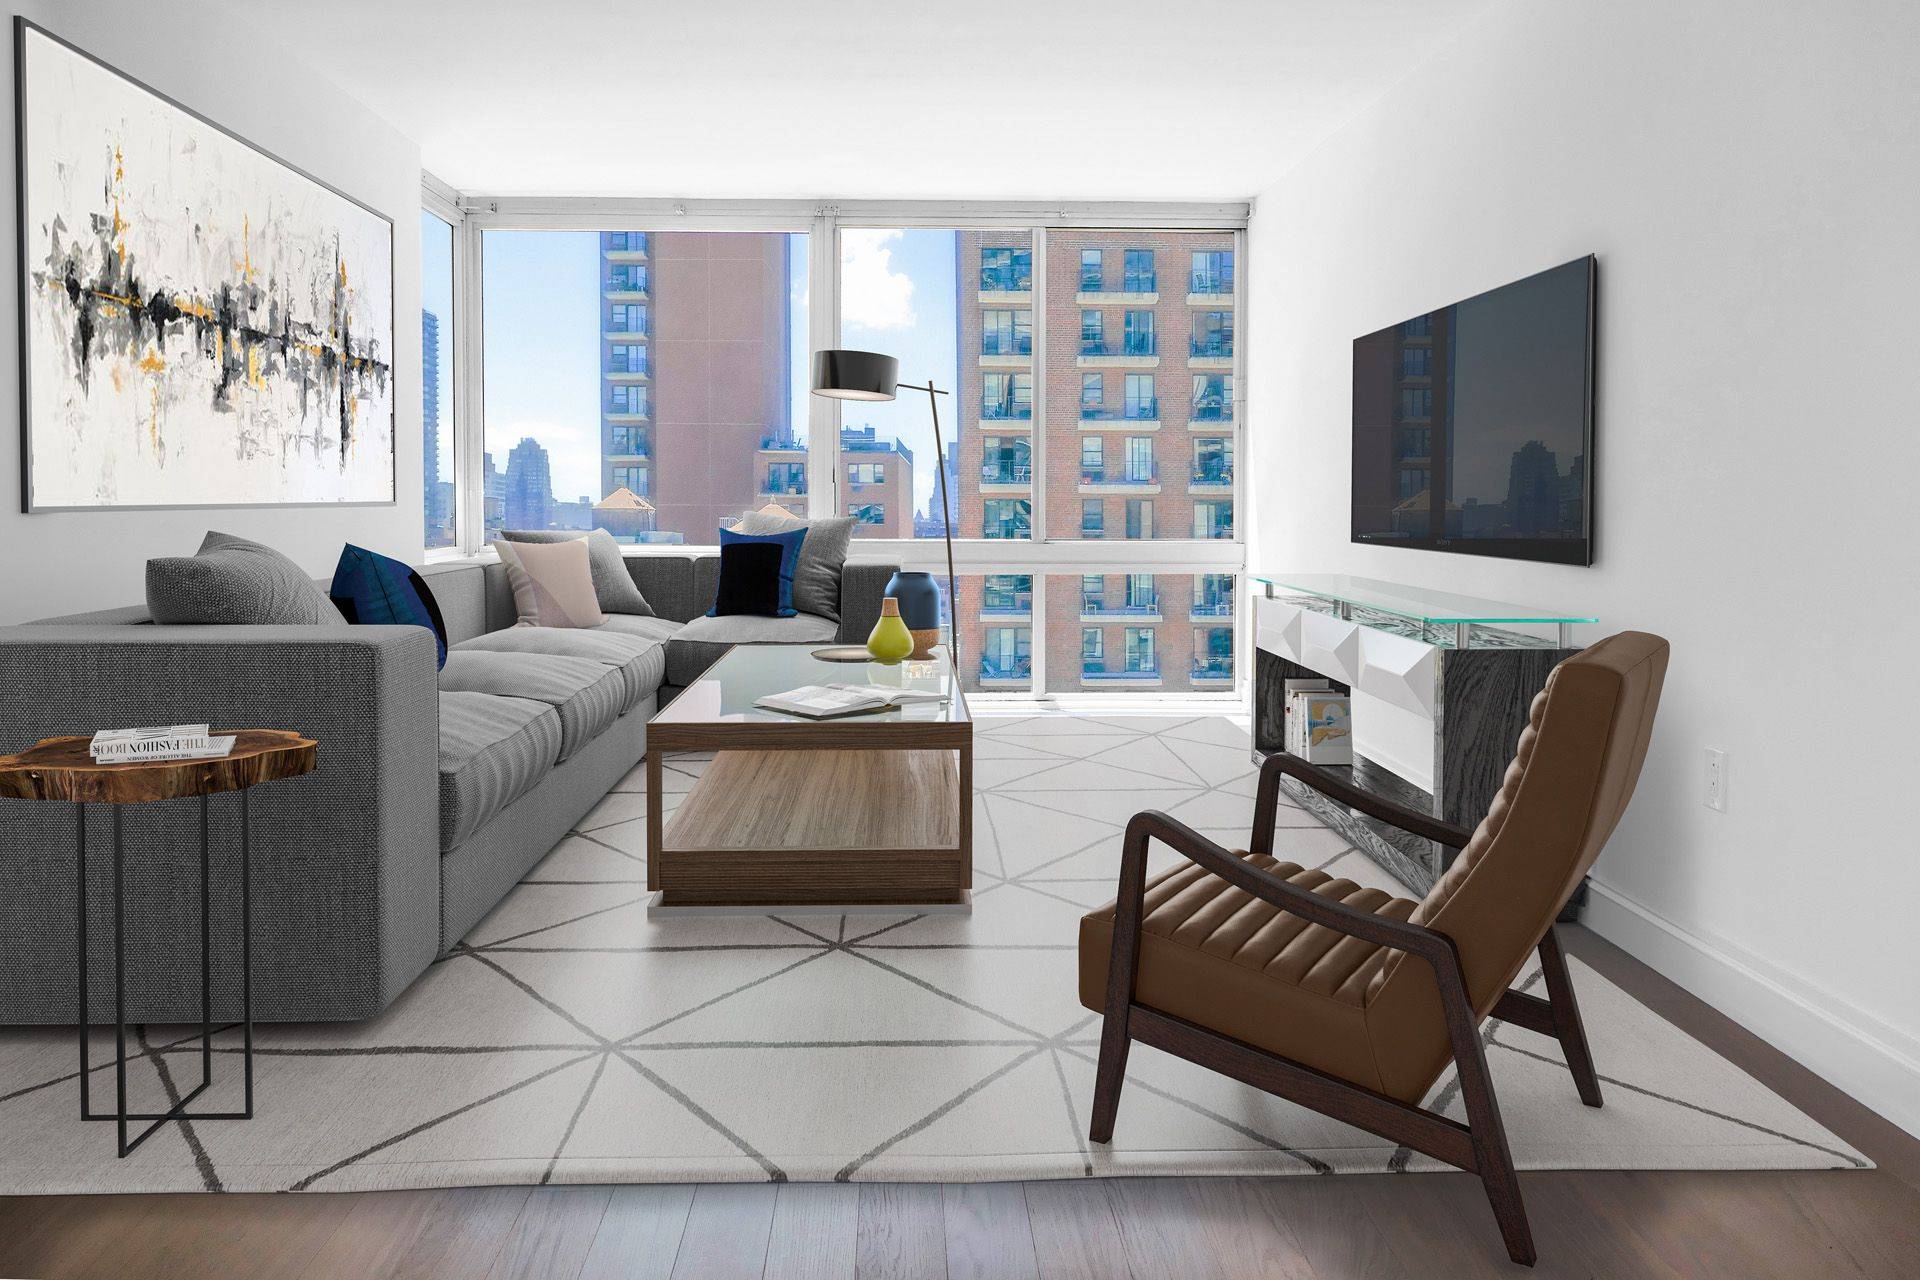 This stunning 25 story glass, steel, limestone and brick Upper East Side apartment building offers studio, one and two bedroom apartments, some of which feature terraces.